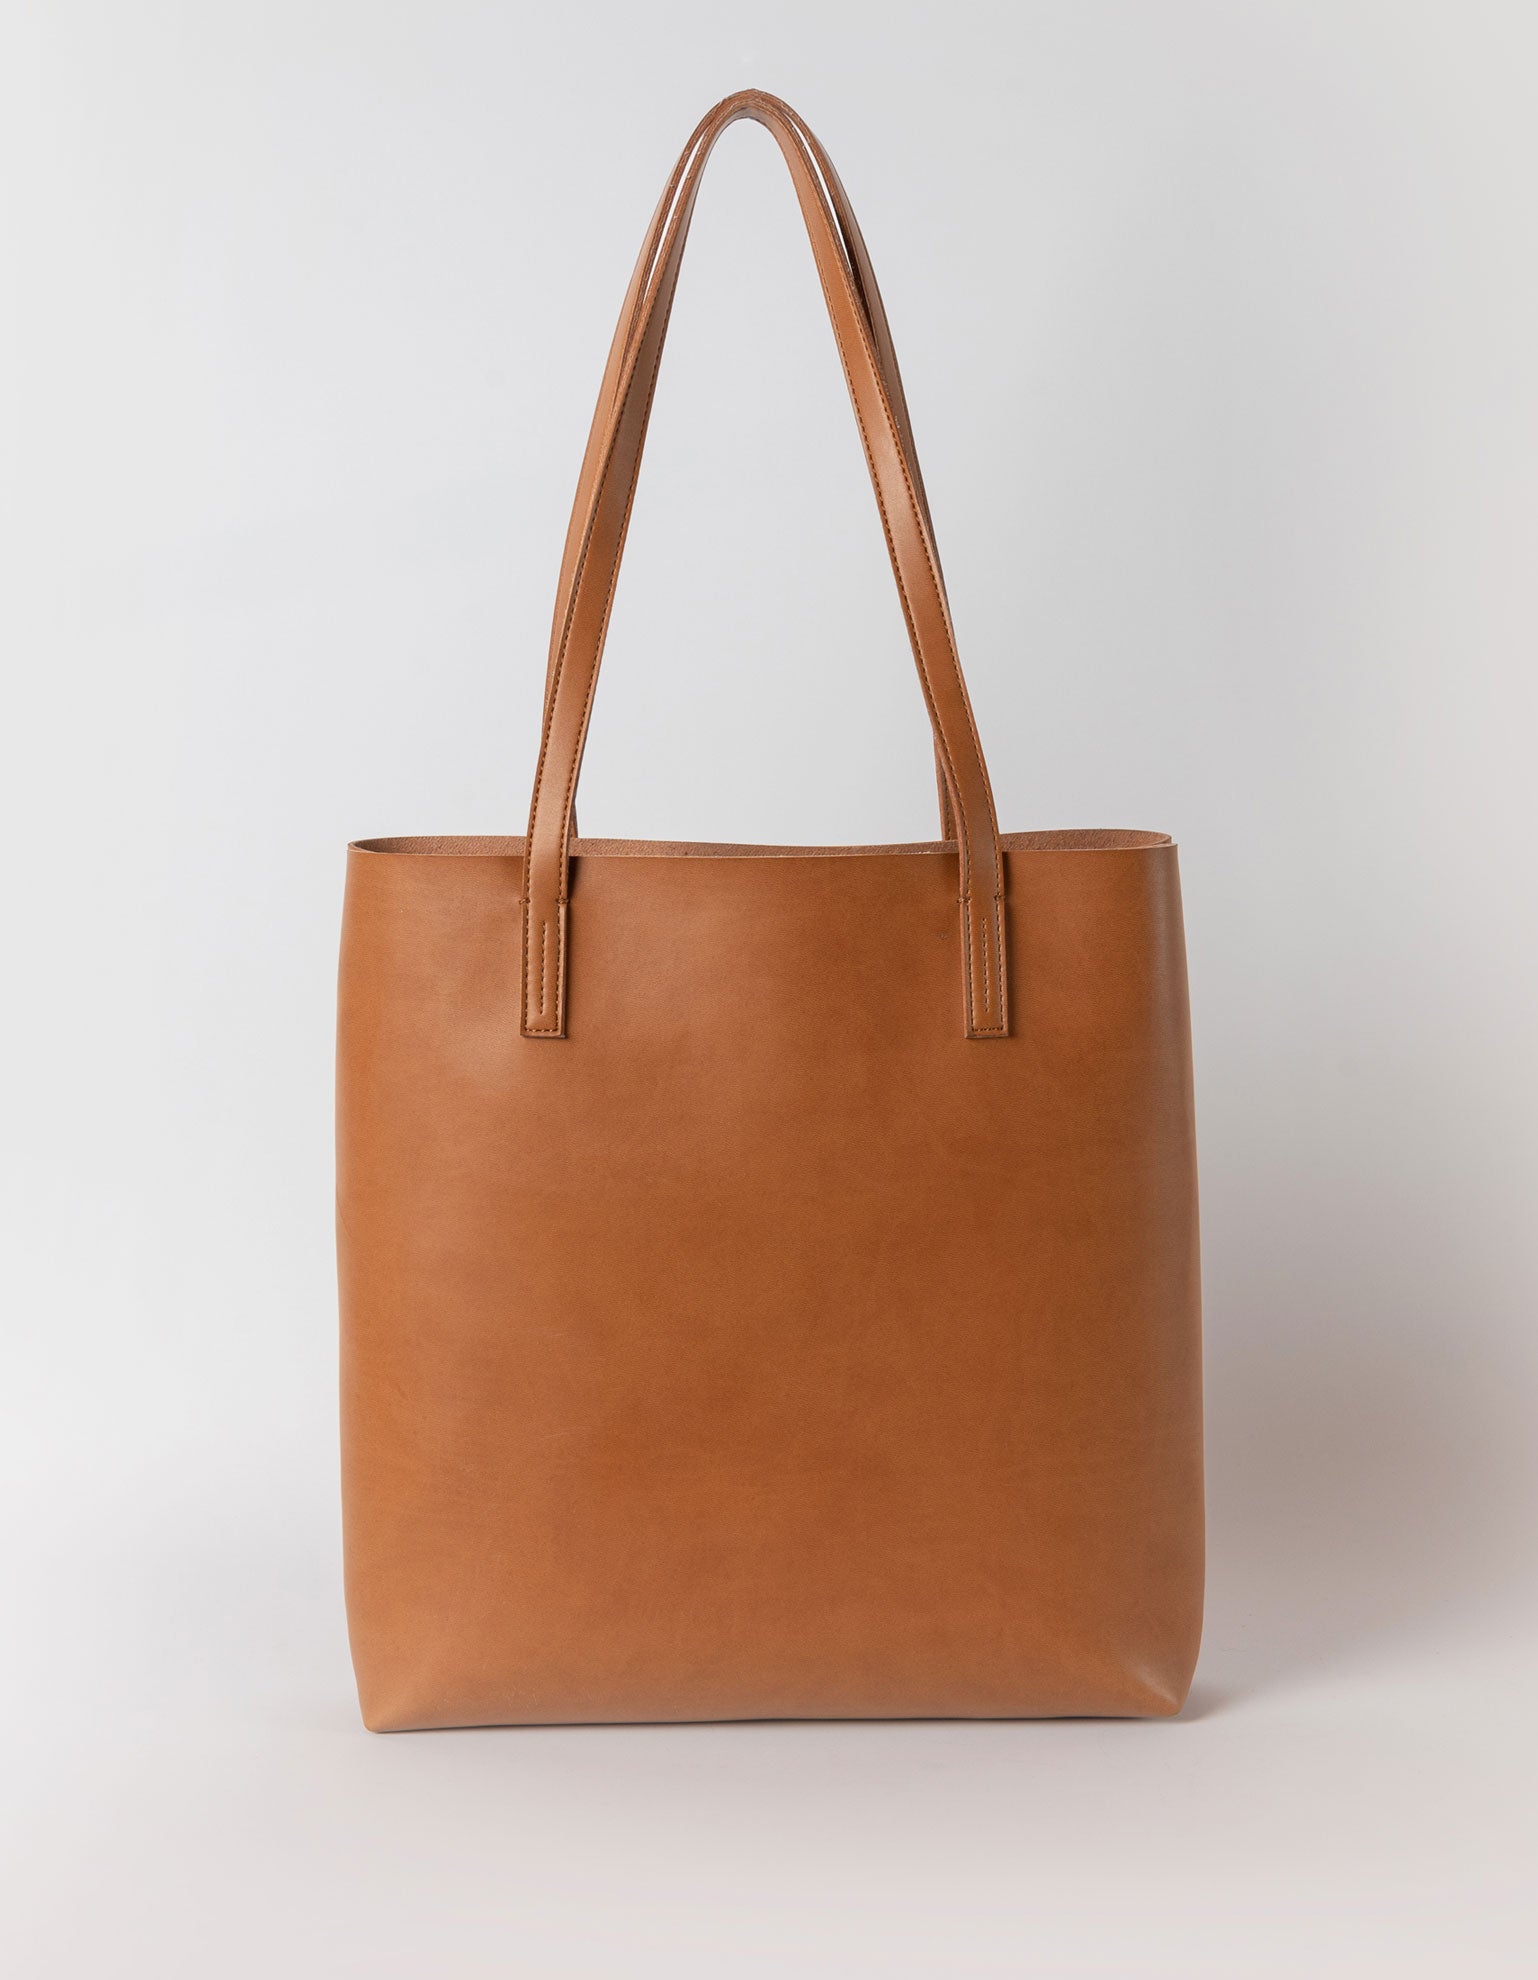 Georgia Tote in Cognac Apple Leather. Back product image.